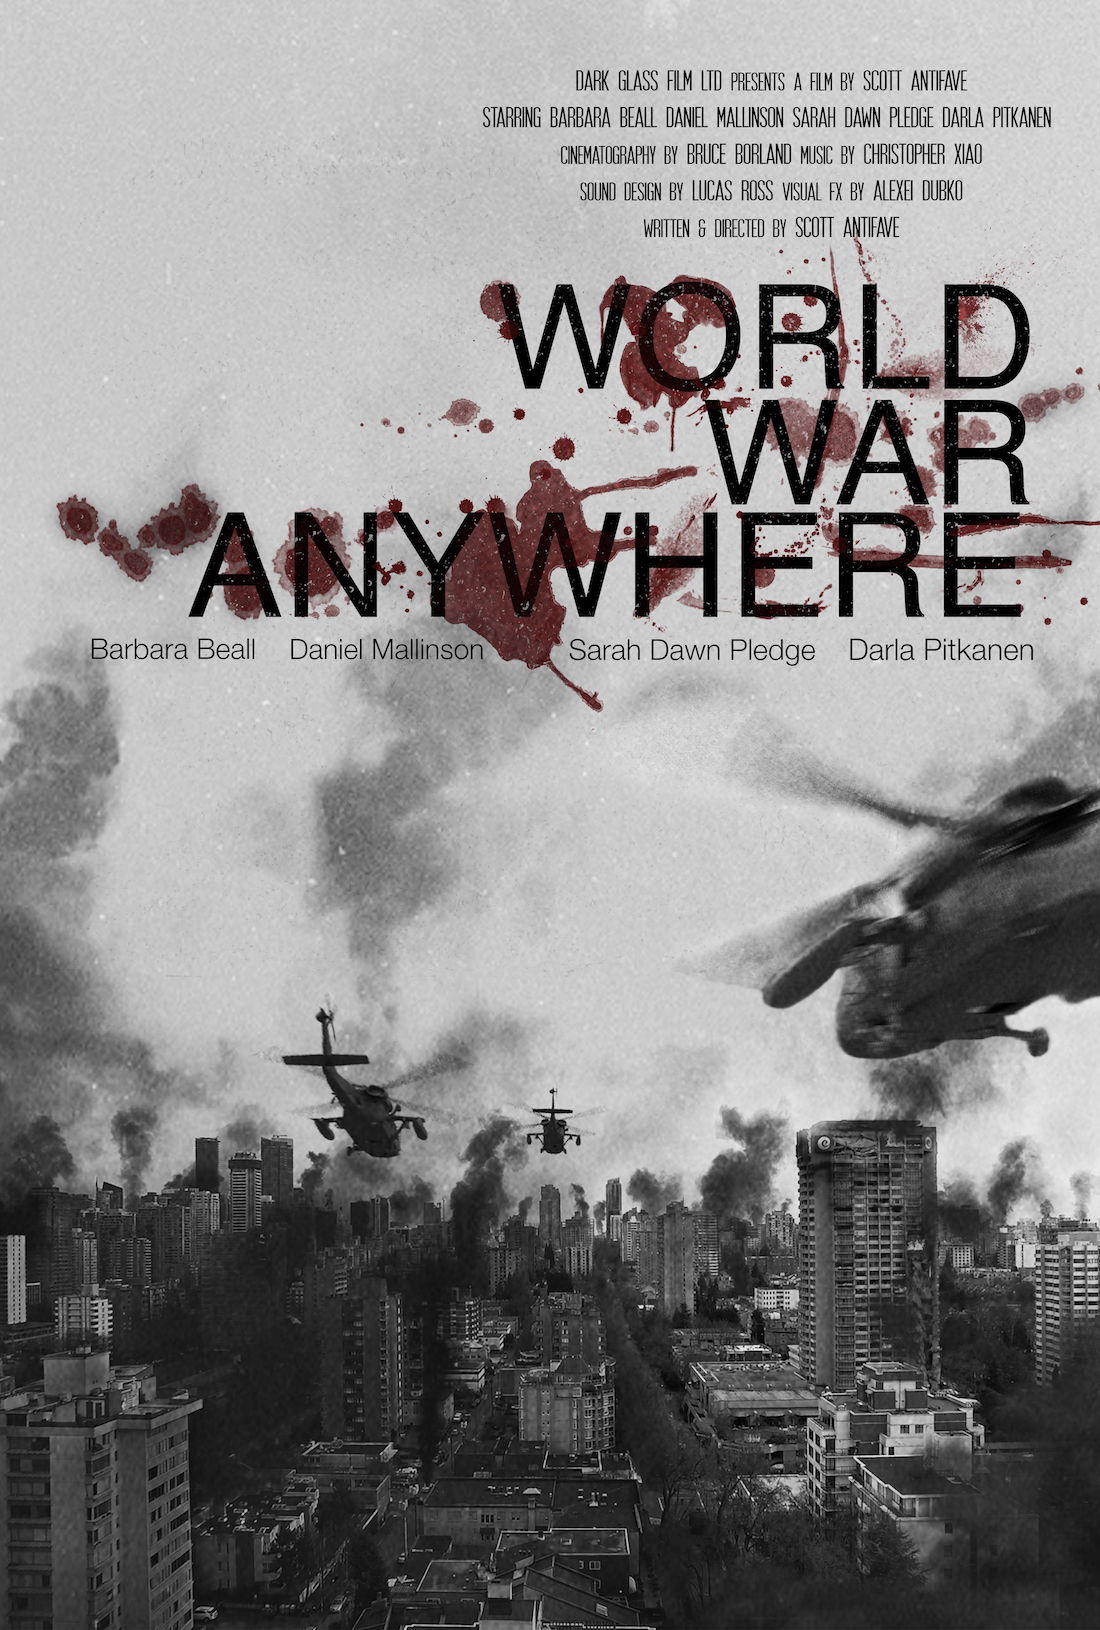 Interview with Scott Antifave, the Director of World War Anywhere